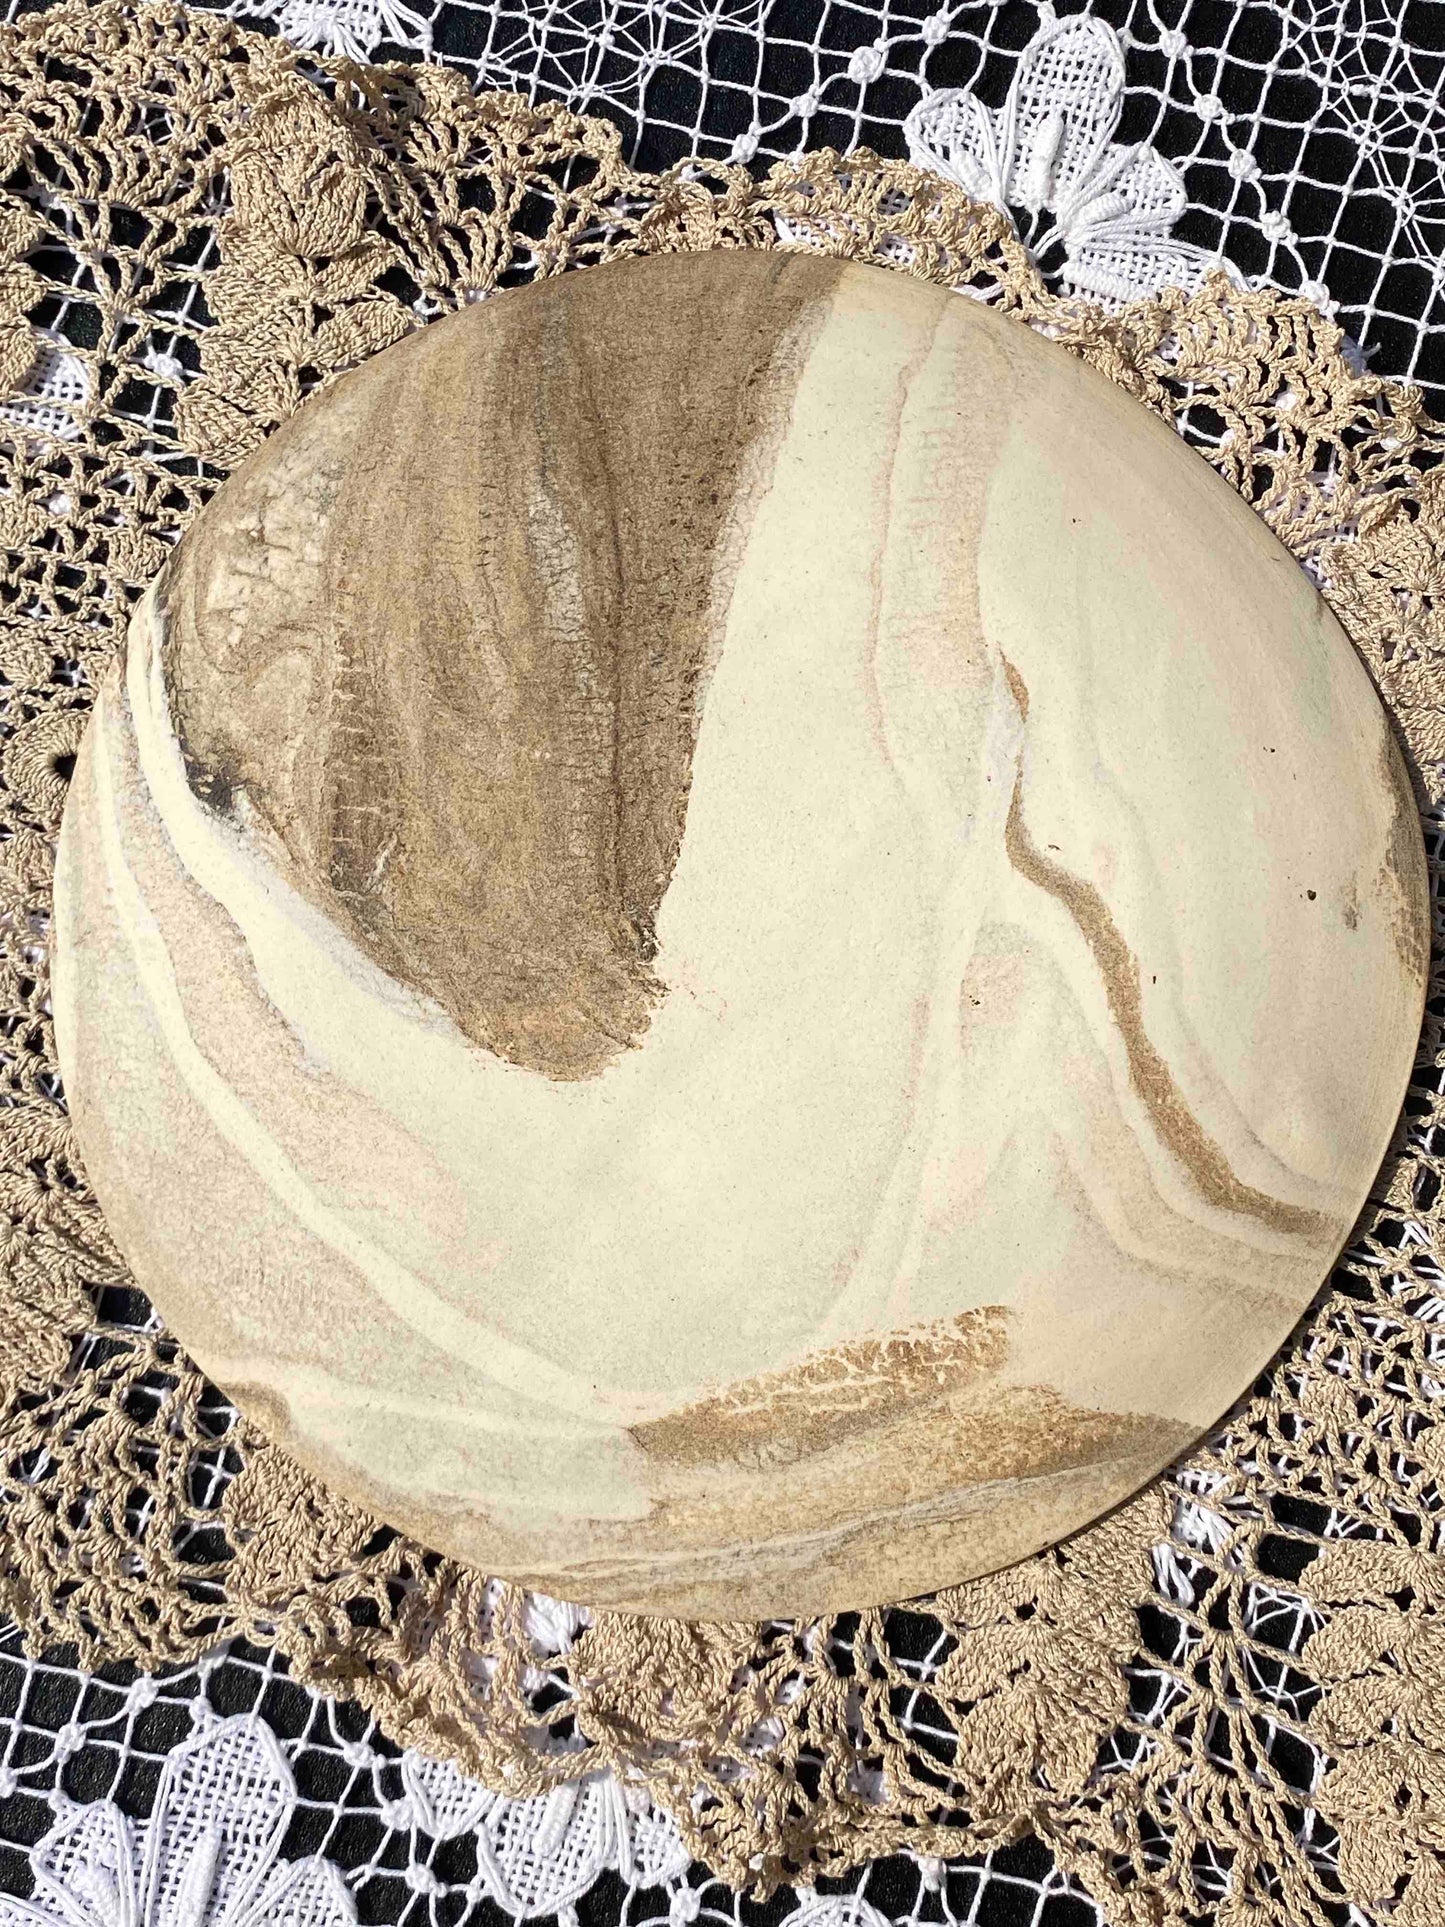 CAITLIN PRINCE - ONE OF A KIND SMALL MARBLED PLATE